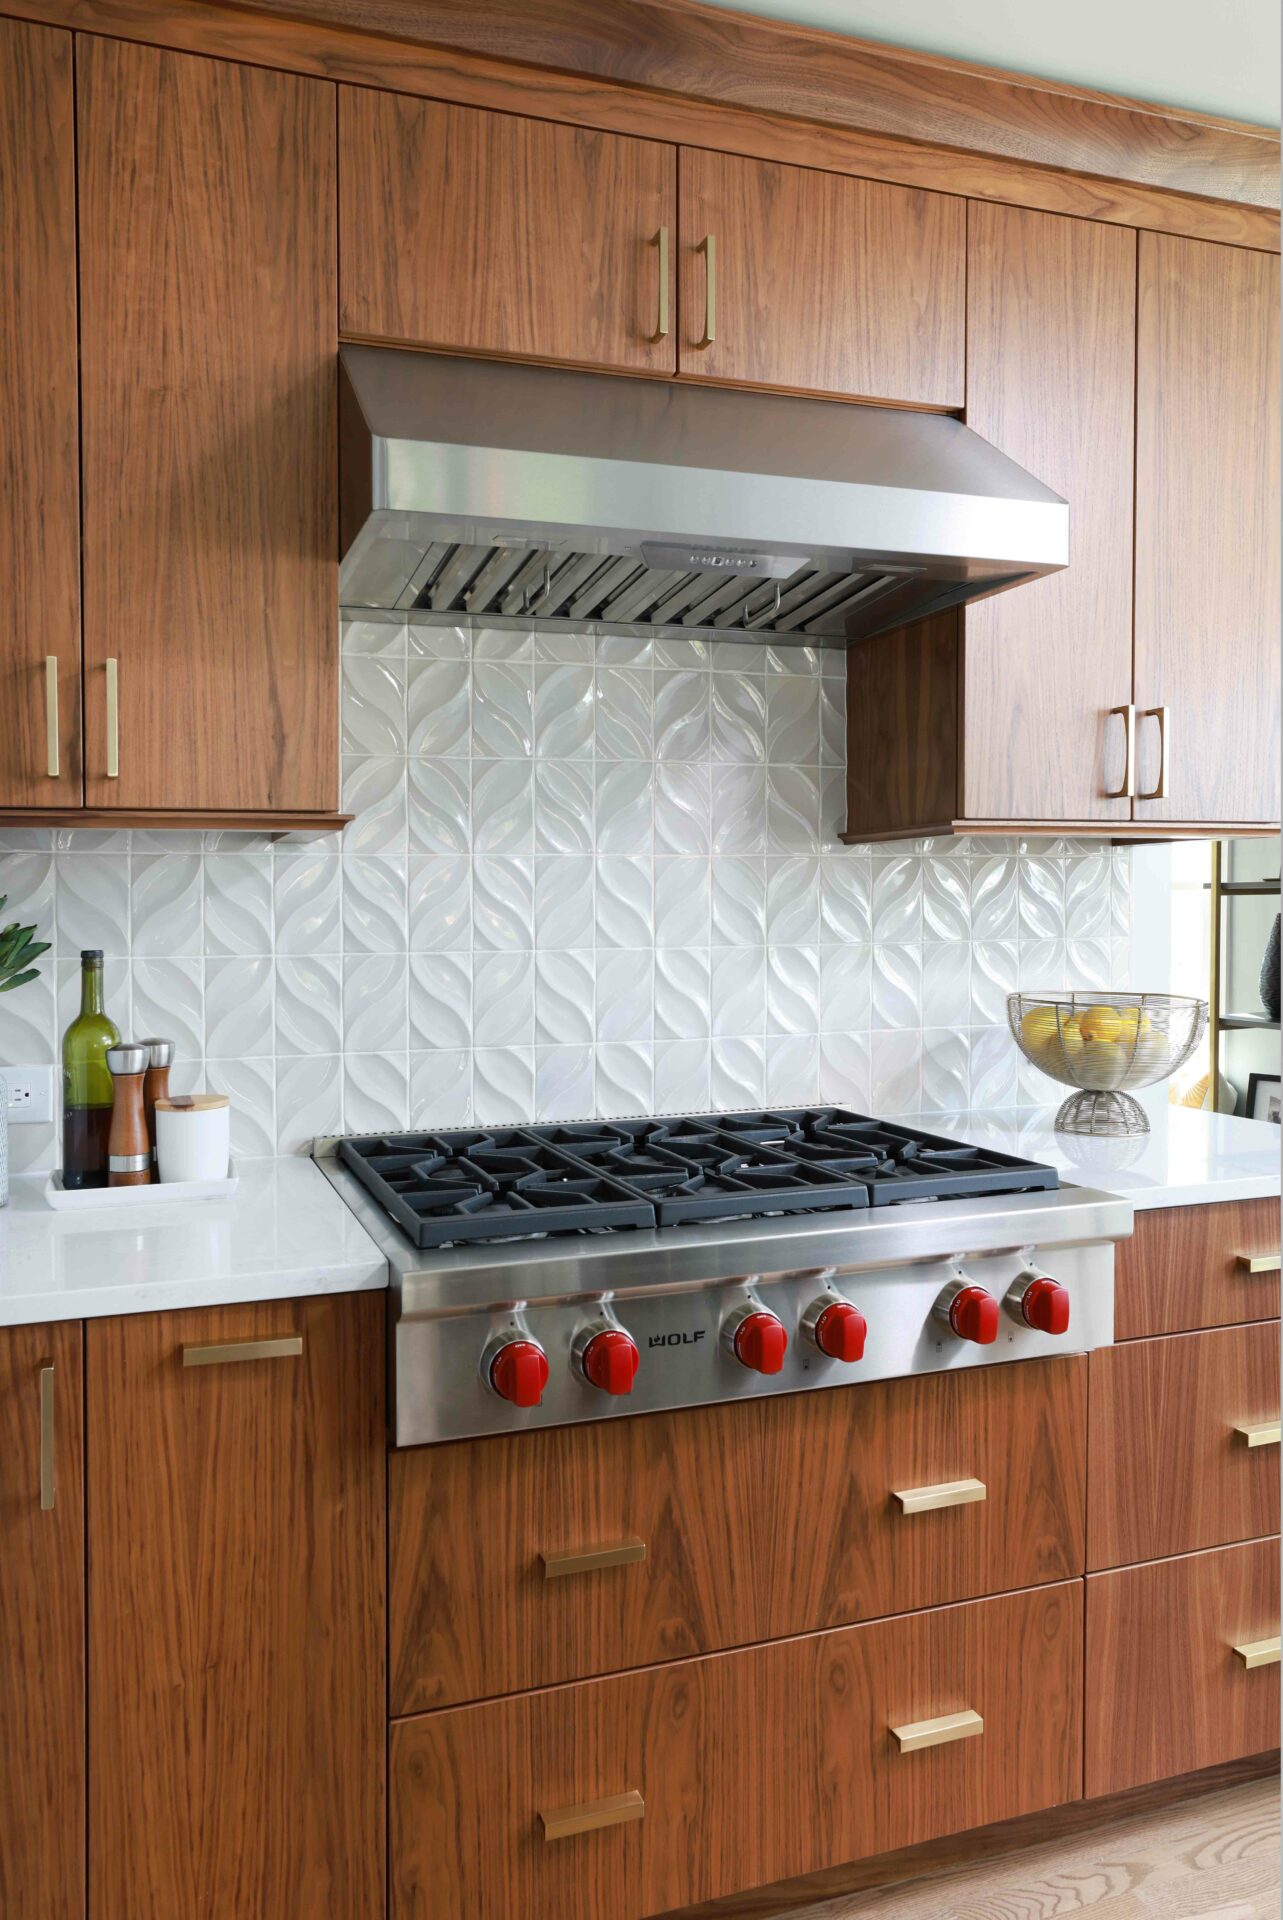 Walnut kitchen cabinets with textured tile, stainless steel hood and rangetop